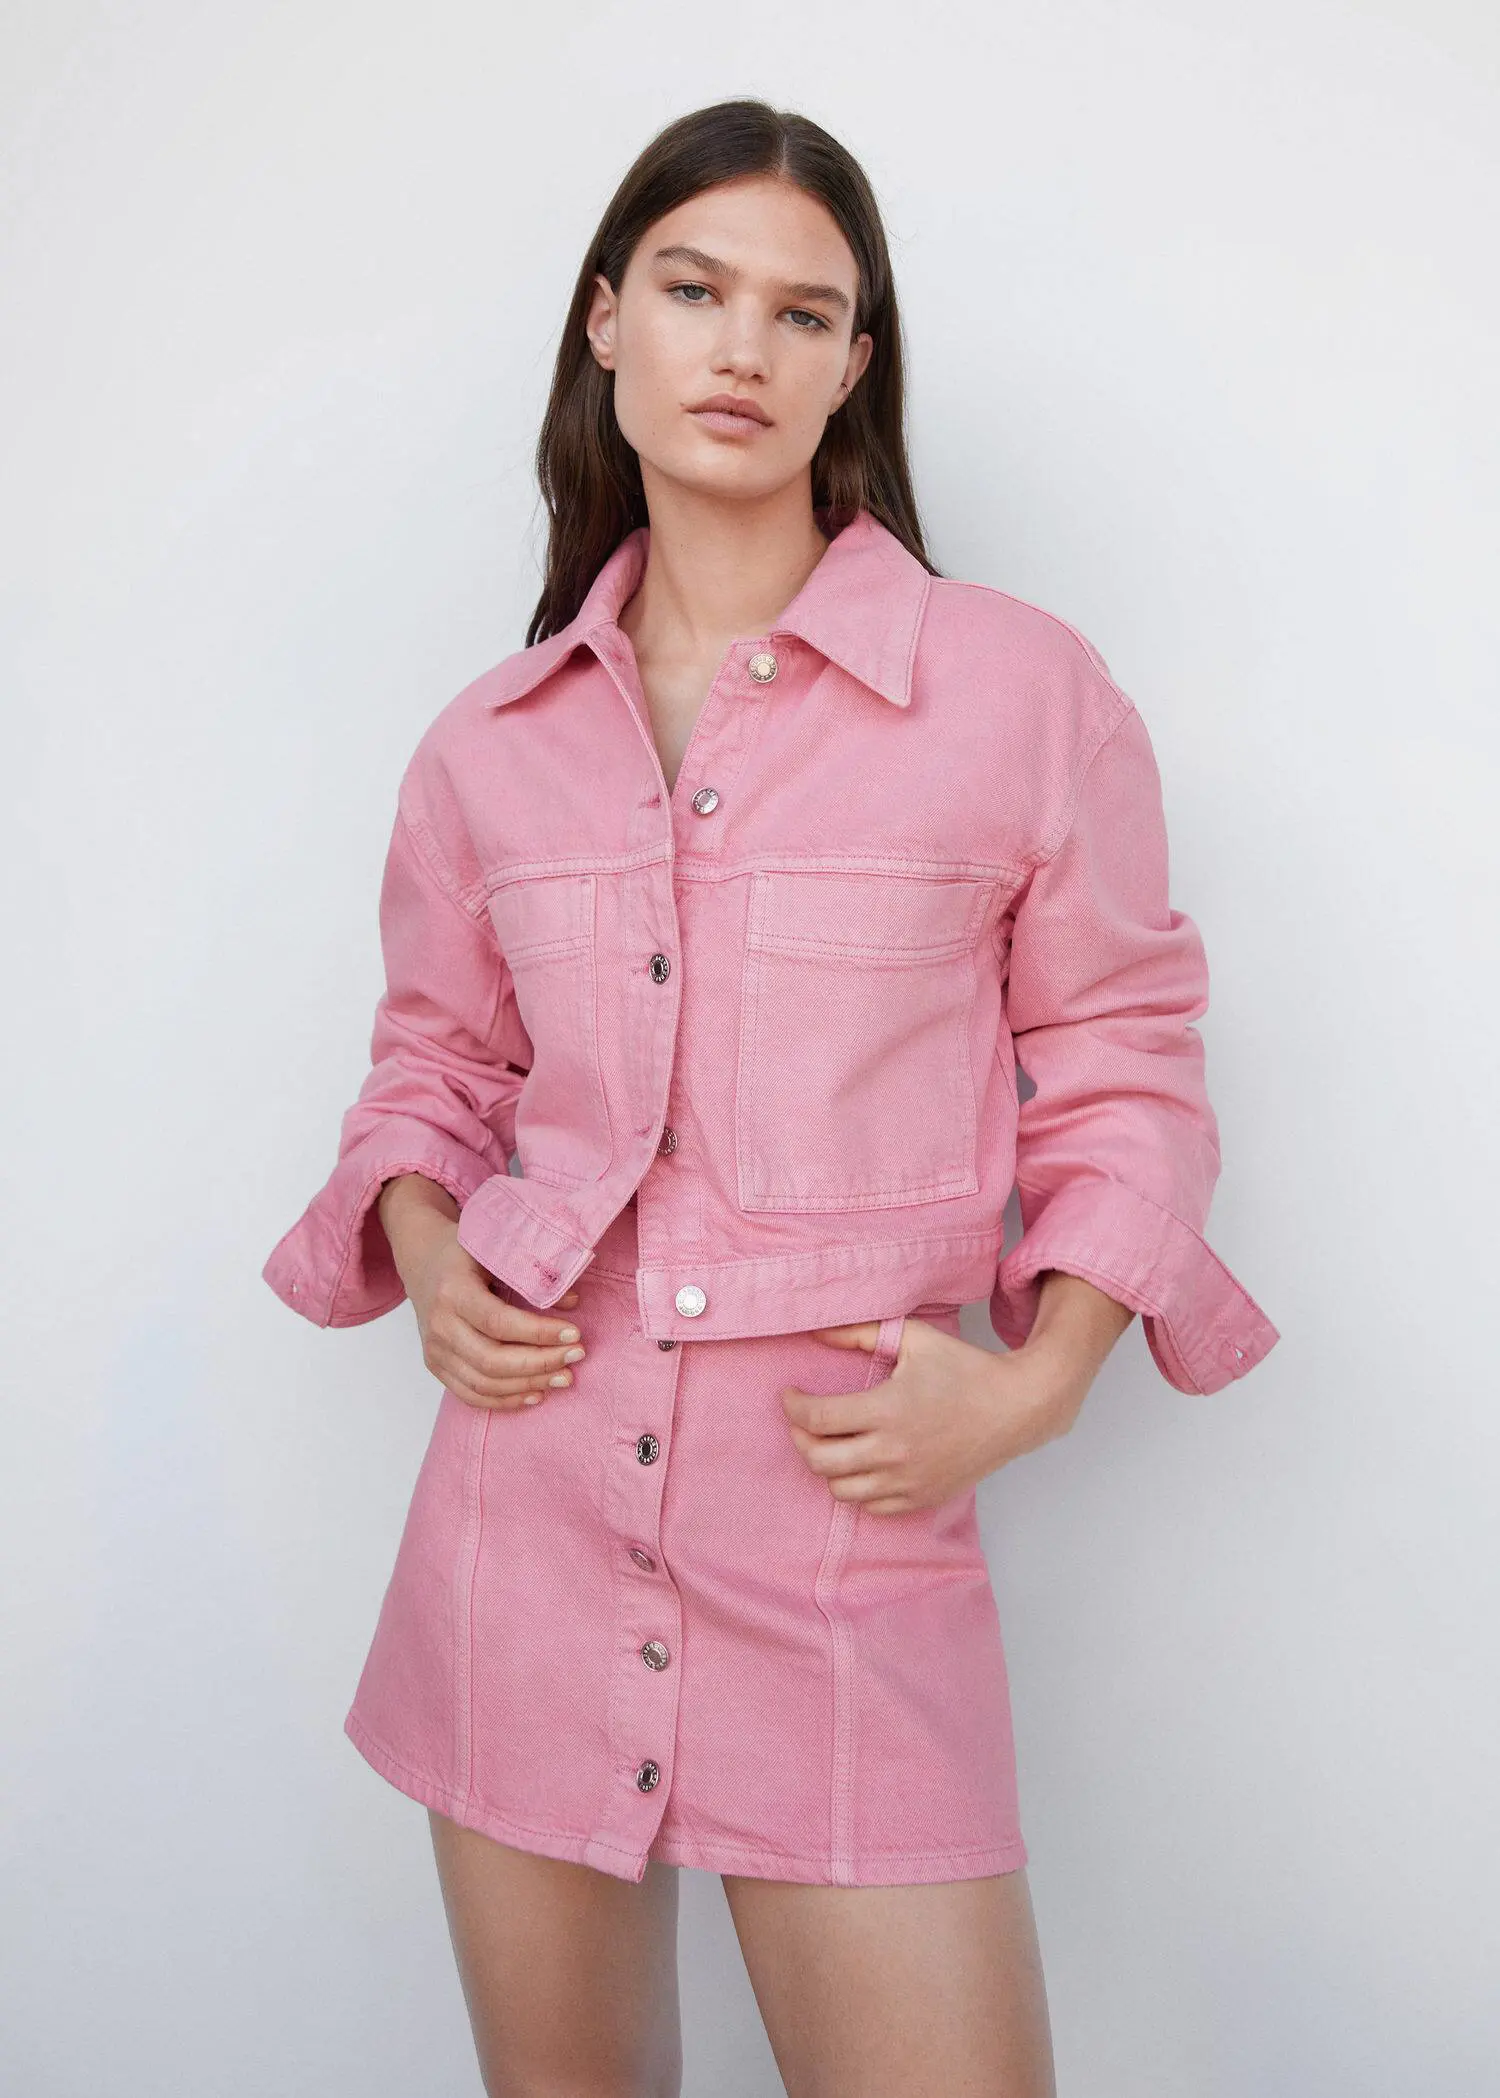 Mango Pocketed denim jacket. a woman wearing a pink jacket and skirt. 